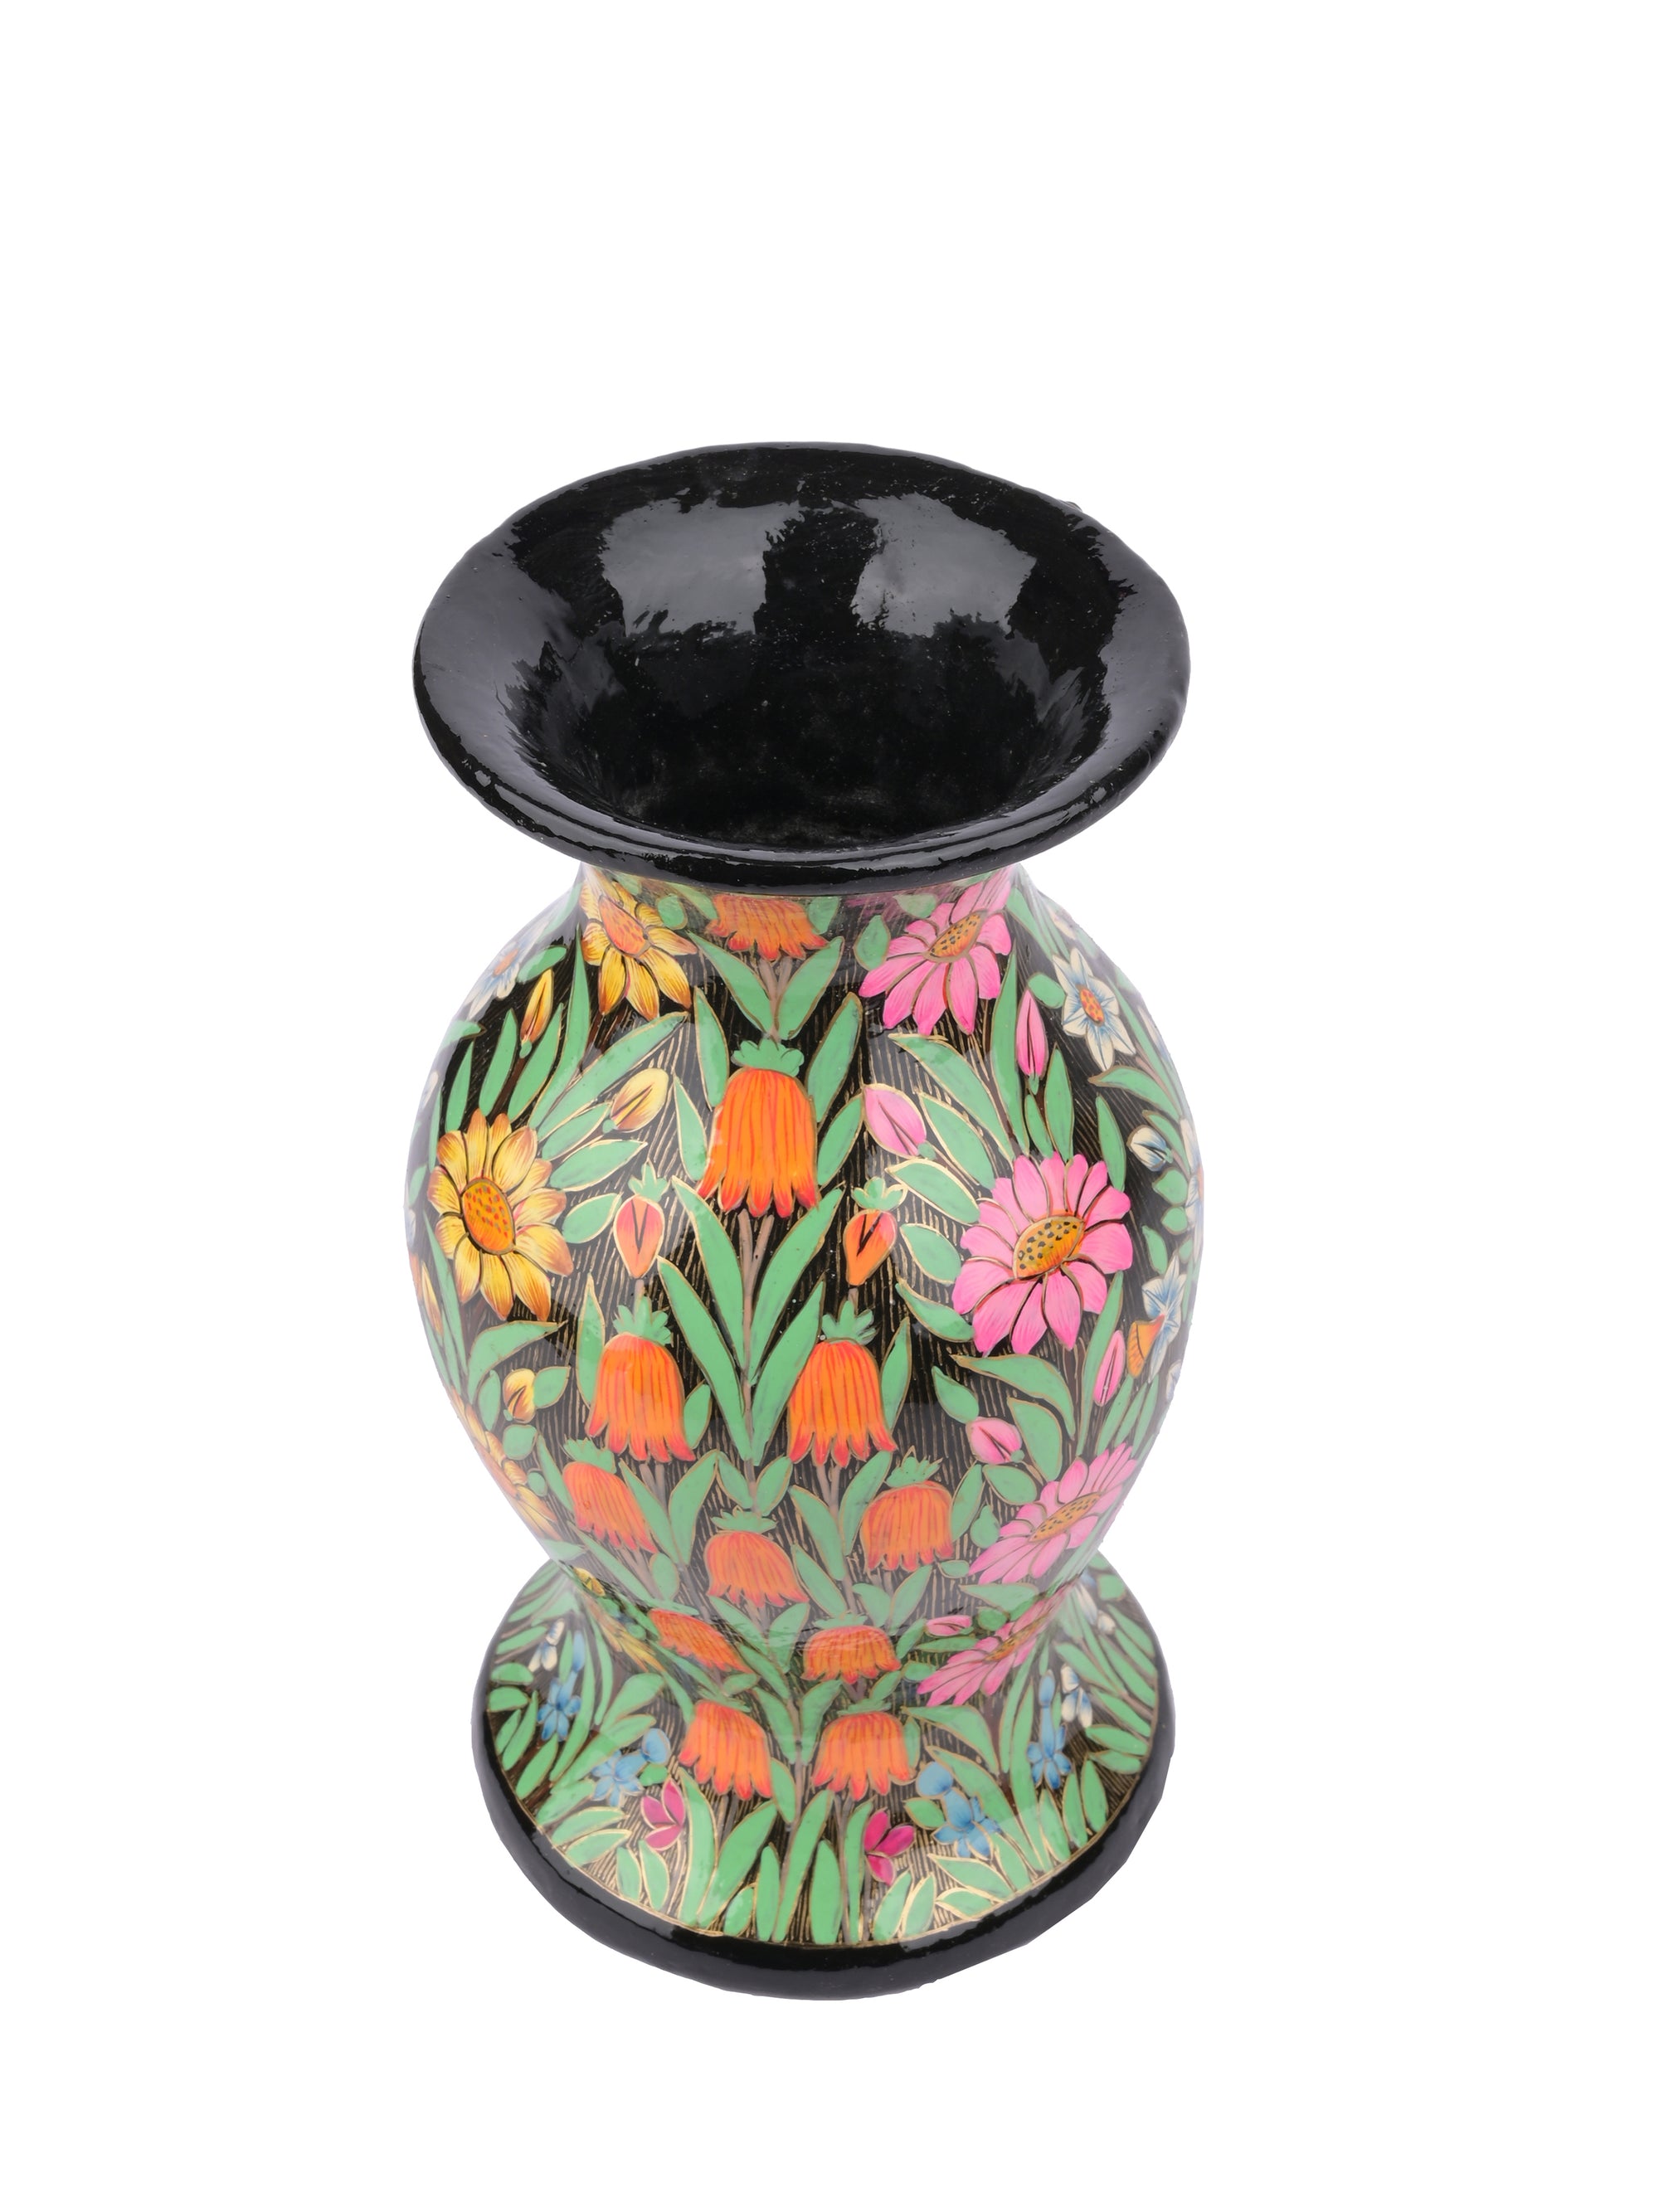 10 inches Paper Mache Vase with colorful flowers painted on Black background - The Heritage Artifacts